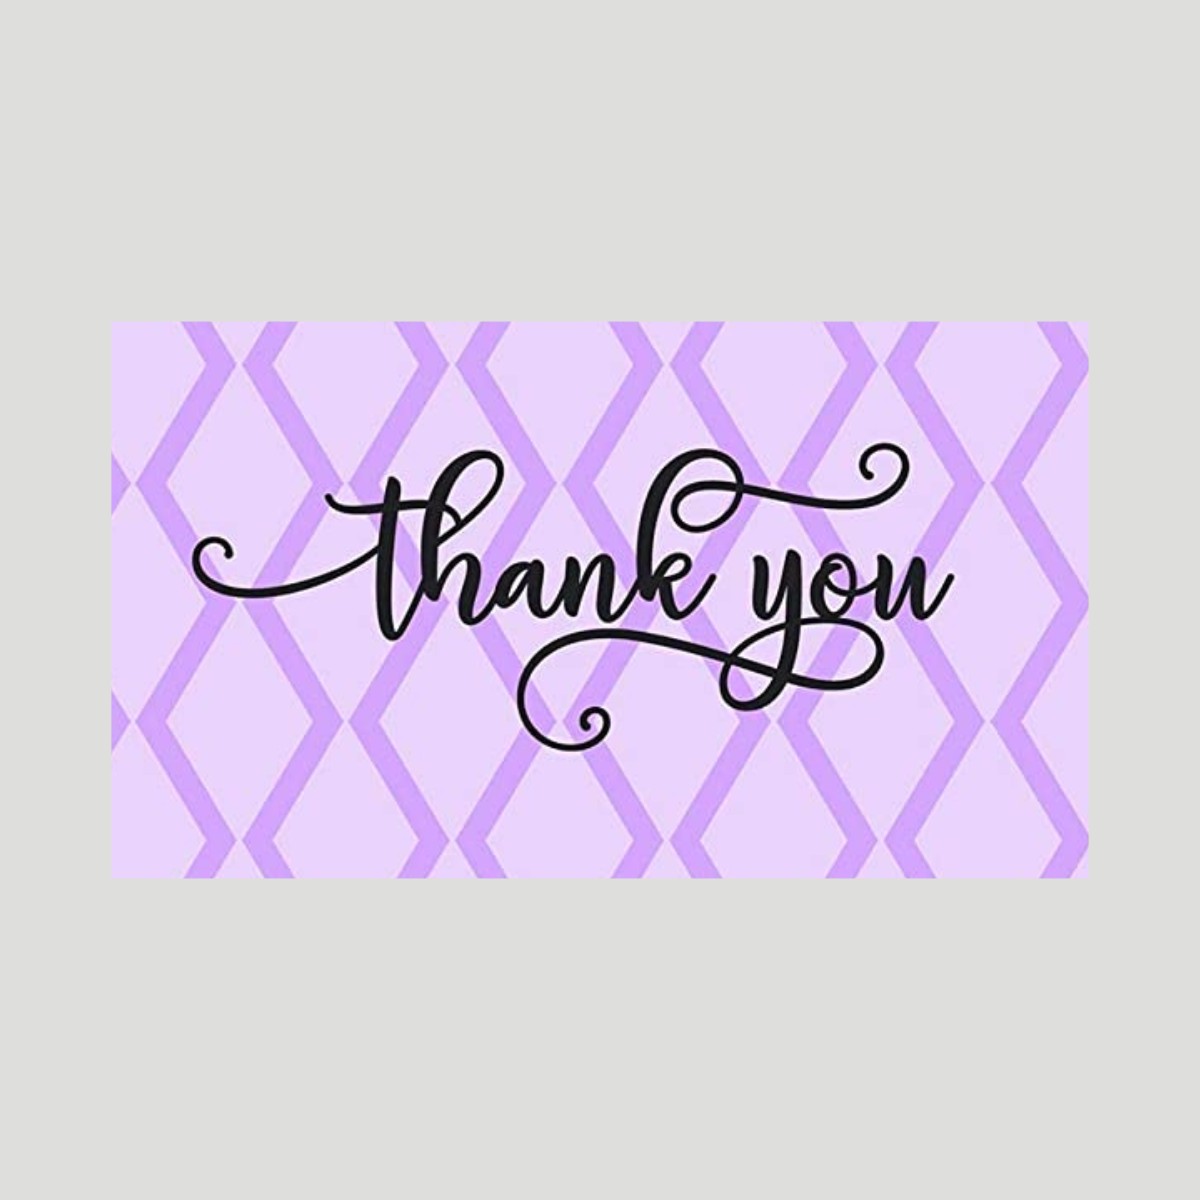 100Pcs Thank You T-shirts Plastic Shopping Bags Grocery Store Small  Business Food Bags With Handles 11.8x19inch Printed In White Purple